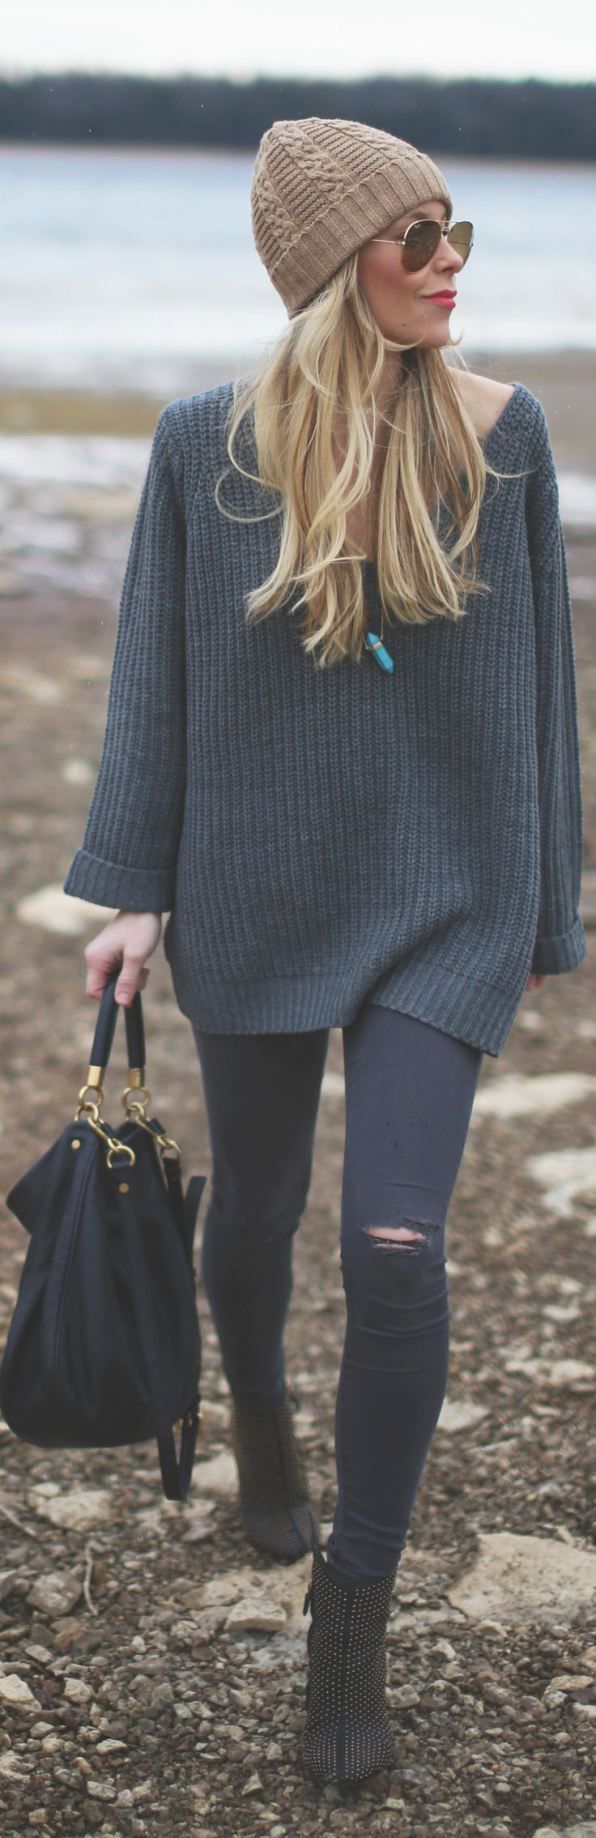 Oversized Sweater and Ripped Leggings